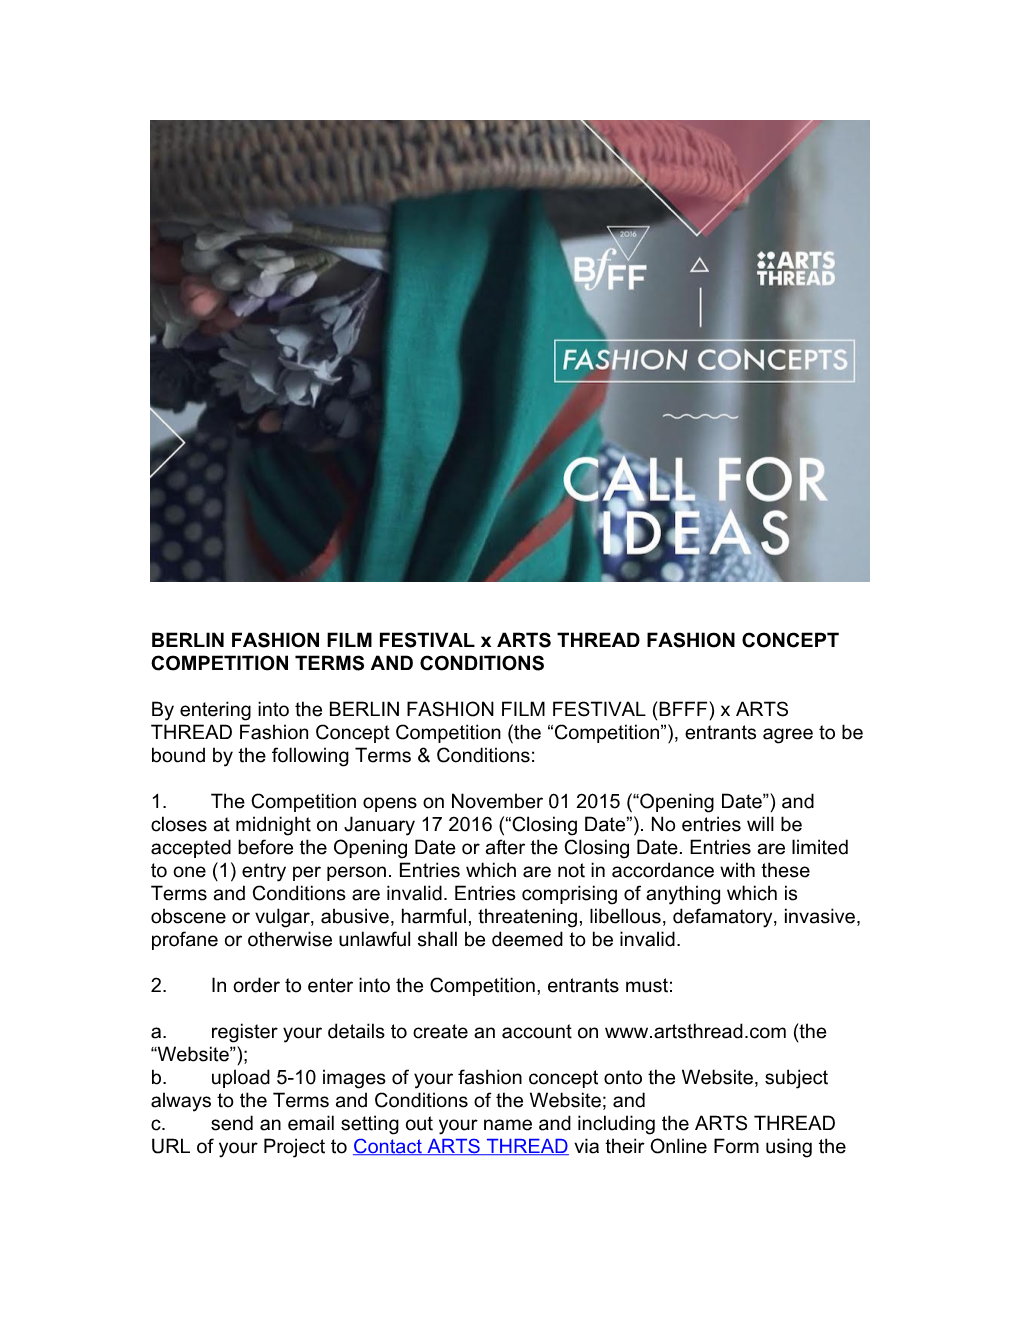 BERLIN FASHION FILM FESTIVAL X ARTS THREAD FASHION CONCEPT COMPETITION TERMS and CONDITIONS